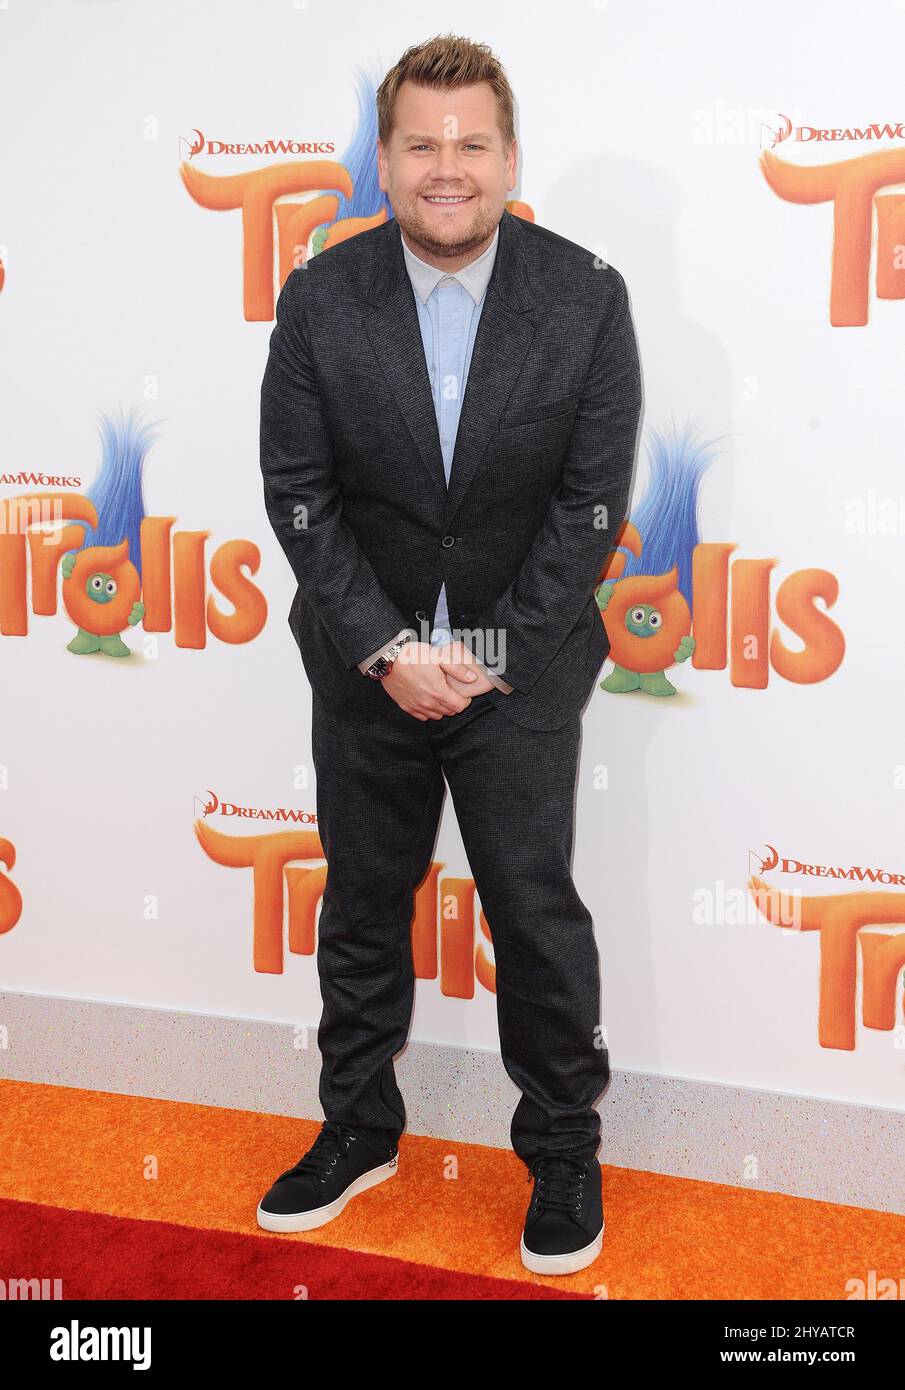 James Corden attending the Los Angeles premiere of Trolls Stock Photo